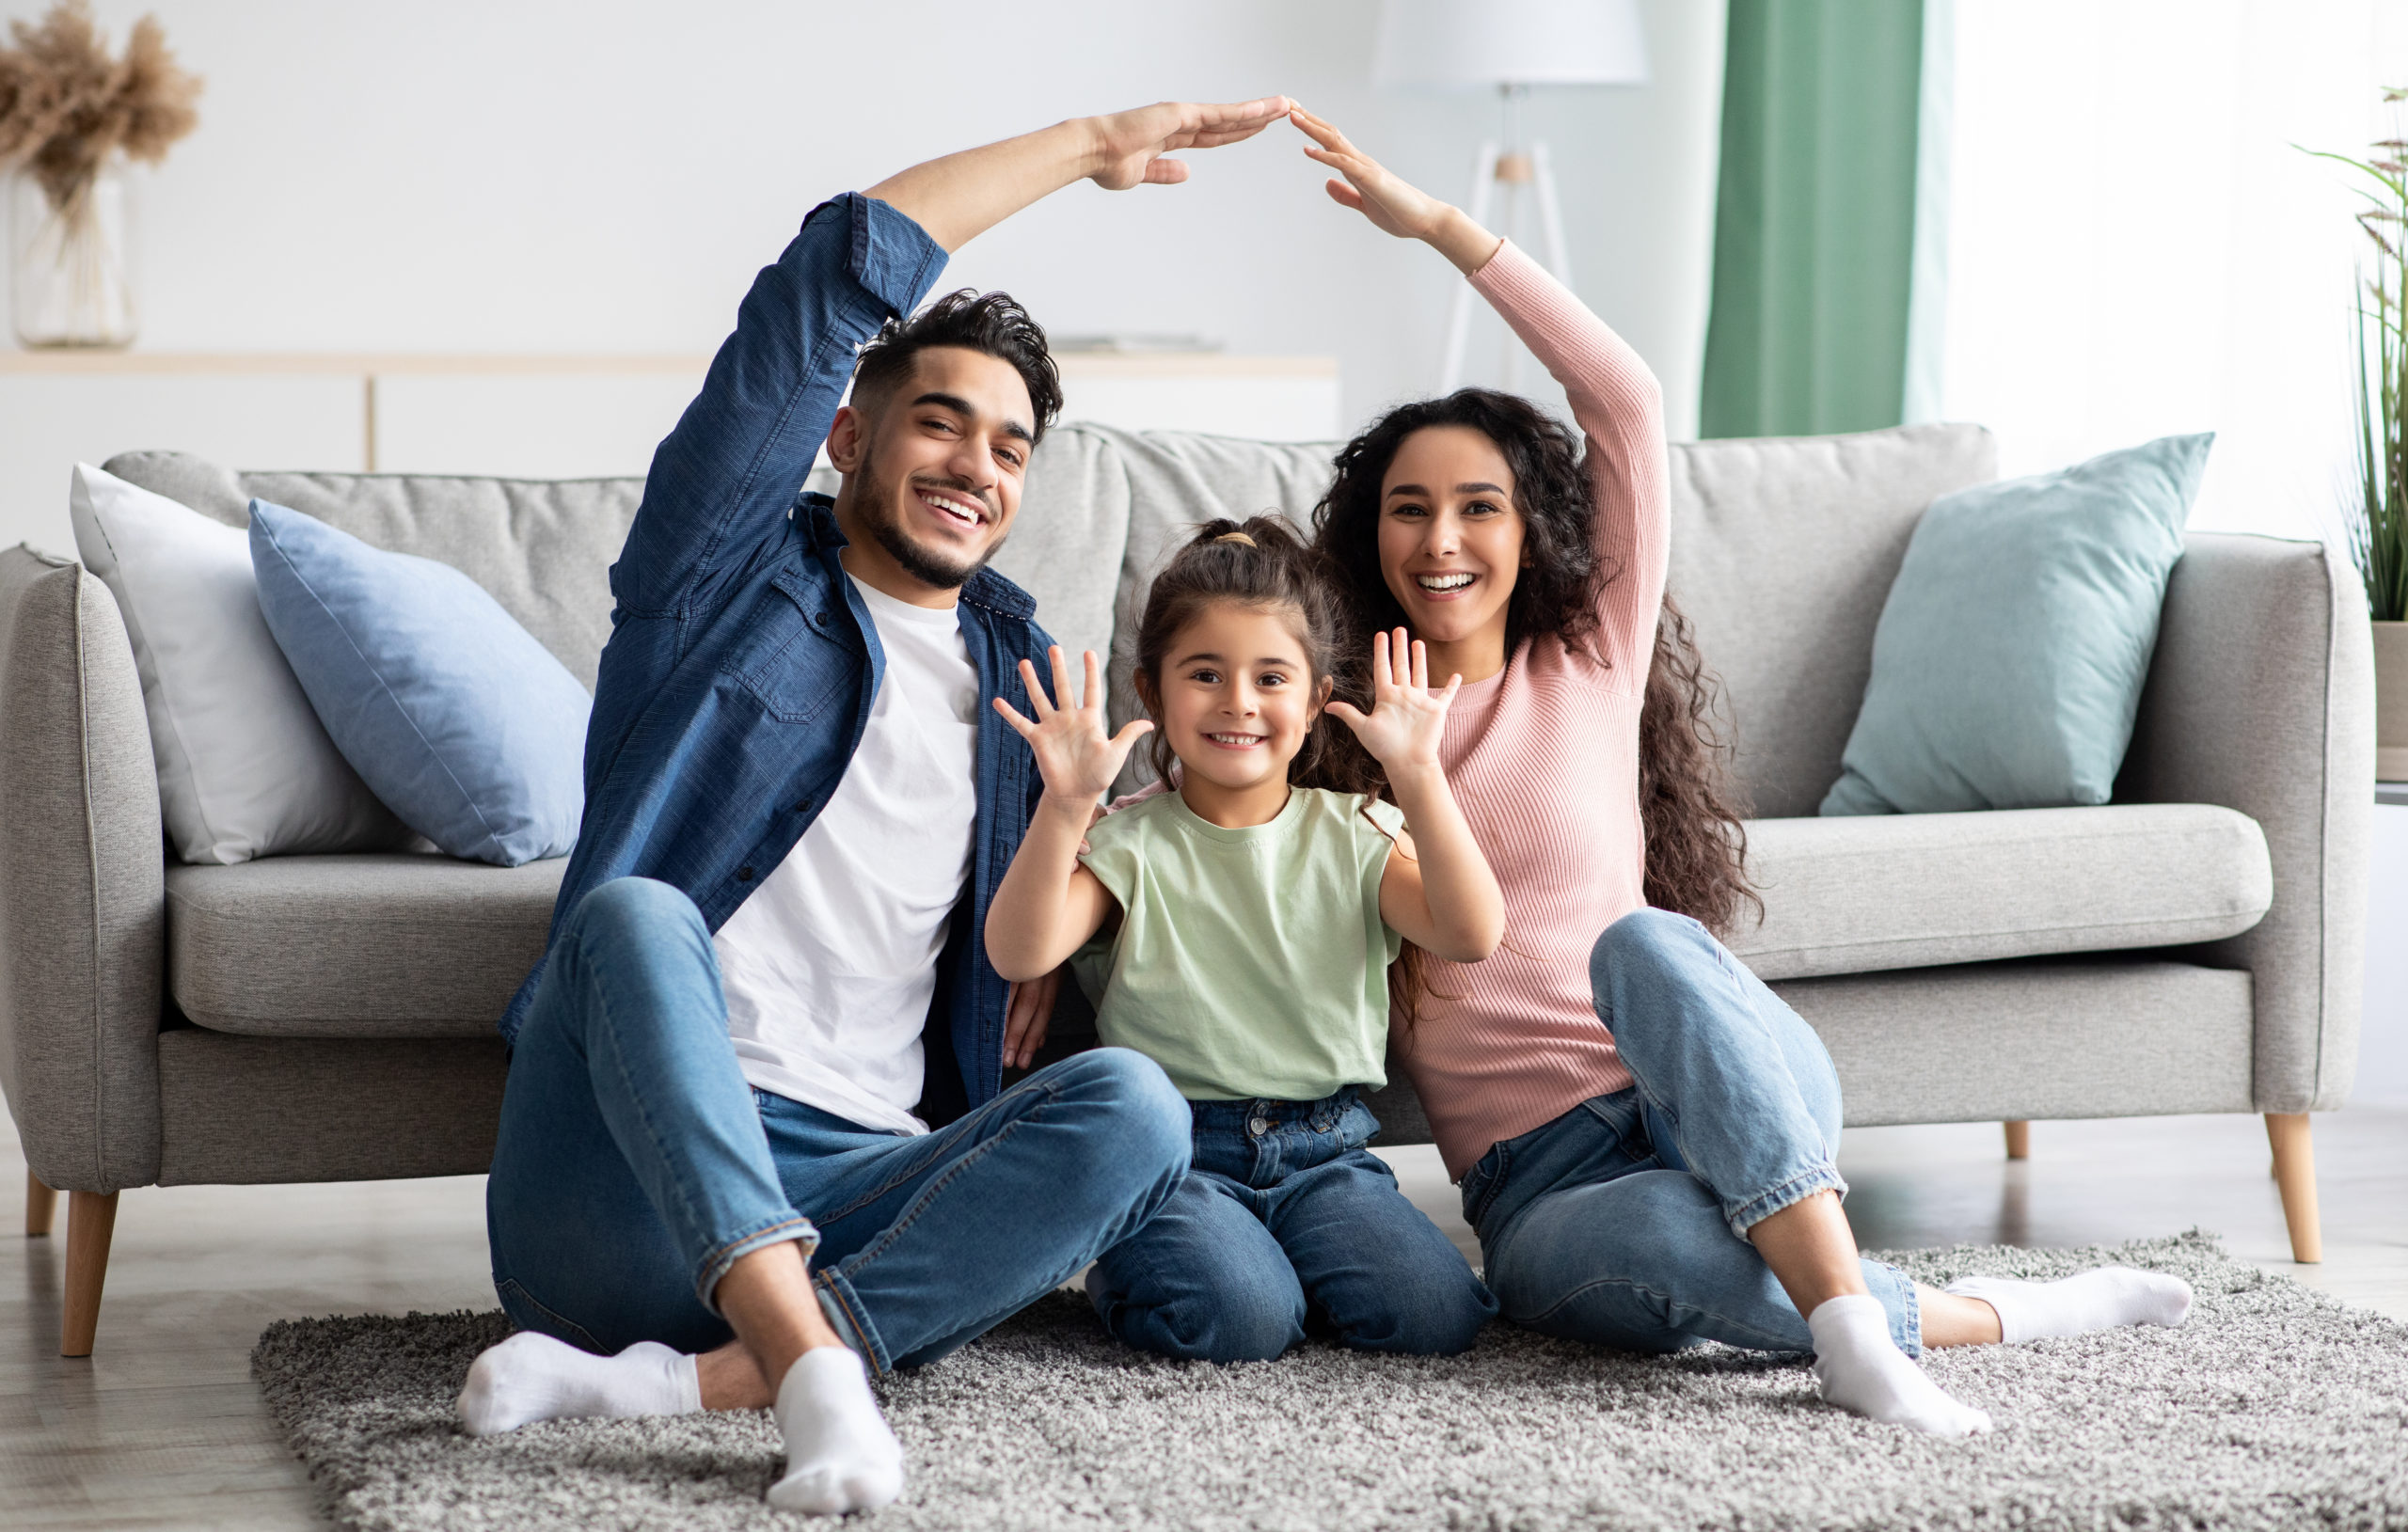 Family care. Arabic parents making symbolic roof of hands above cute little daughter while sitting together on floor in living room, middle eastern mom and dad having fun with their child at home